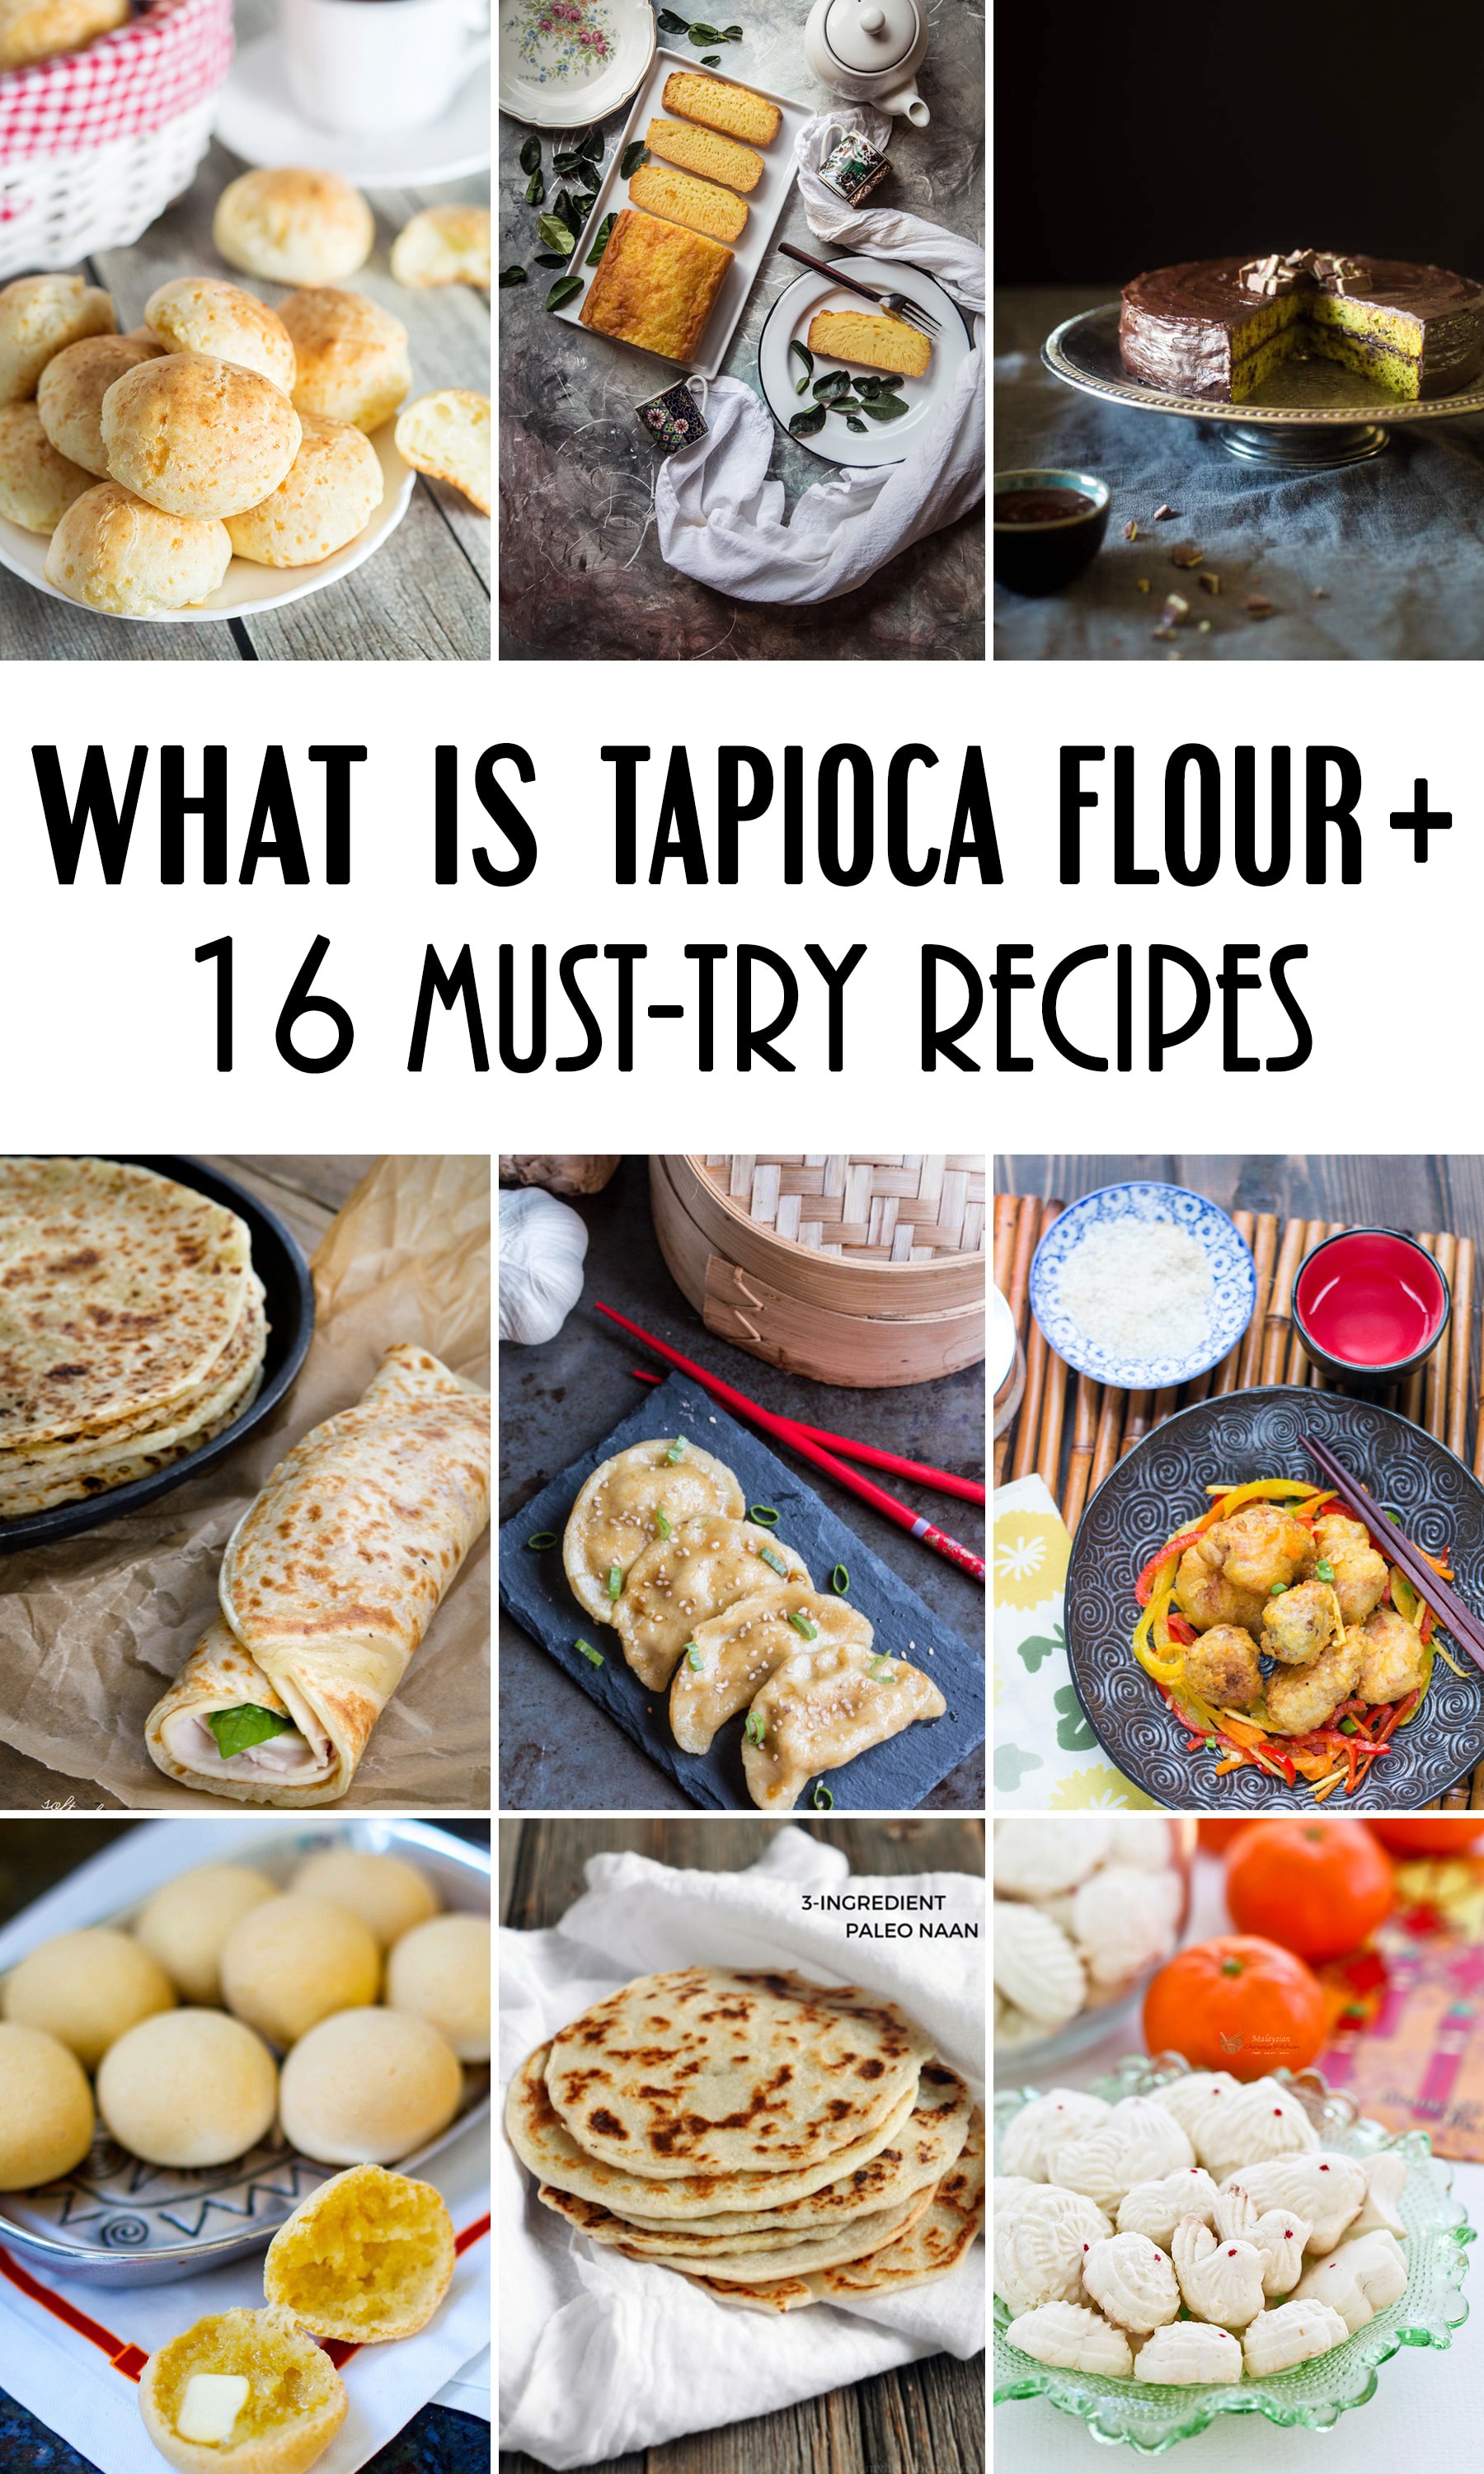 16 Must-Try Tapioca Flour Recipes that will make you appreciate this gluten-free, grain-free, and paleo-friendly product coming from South America! #glutenfree 